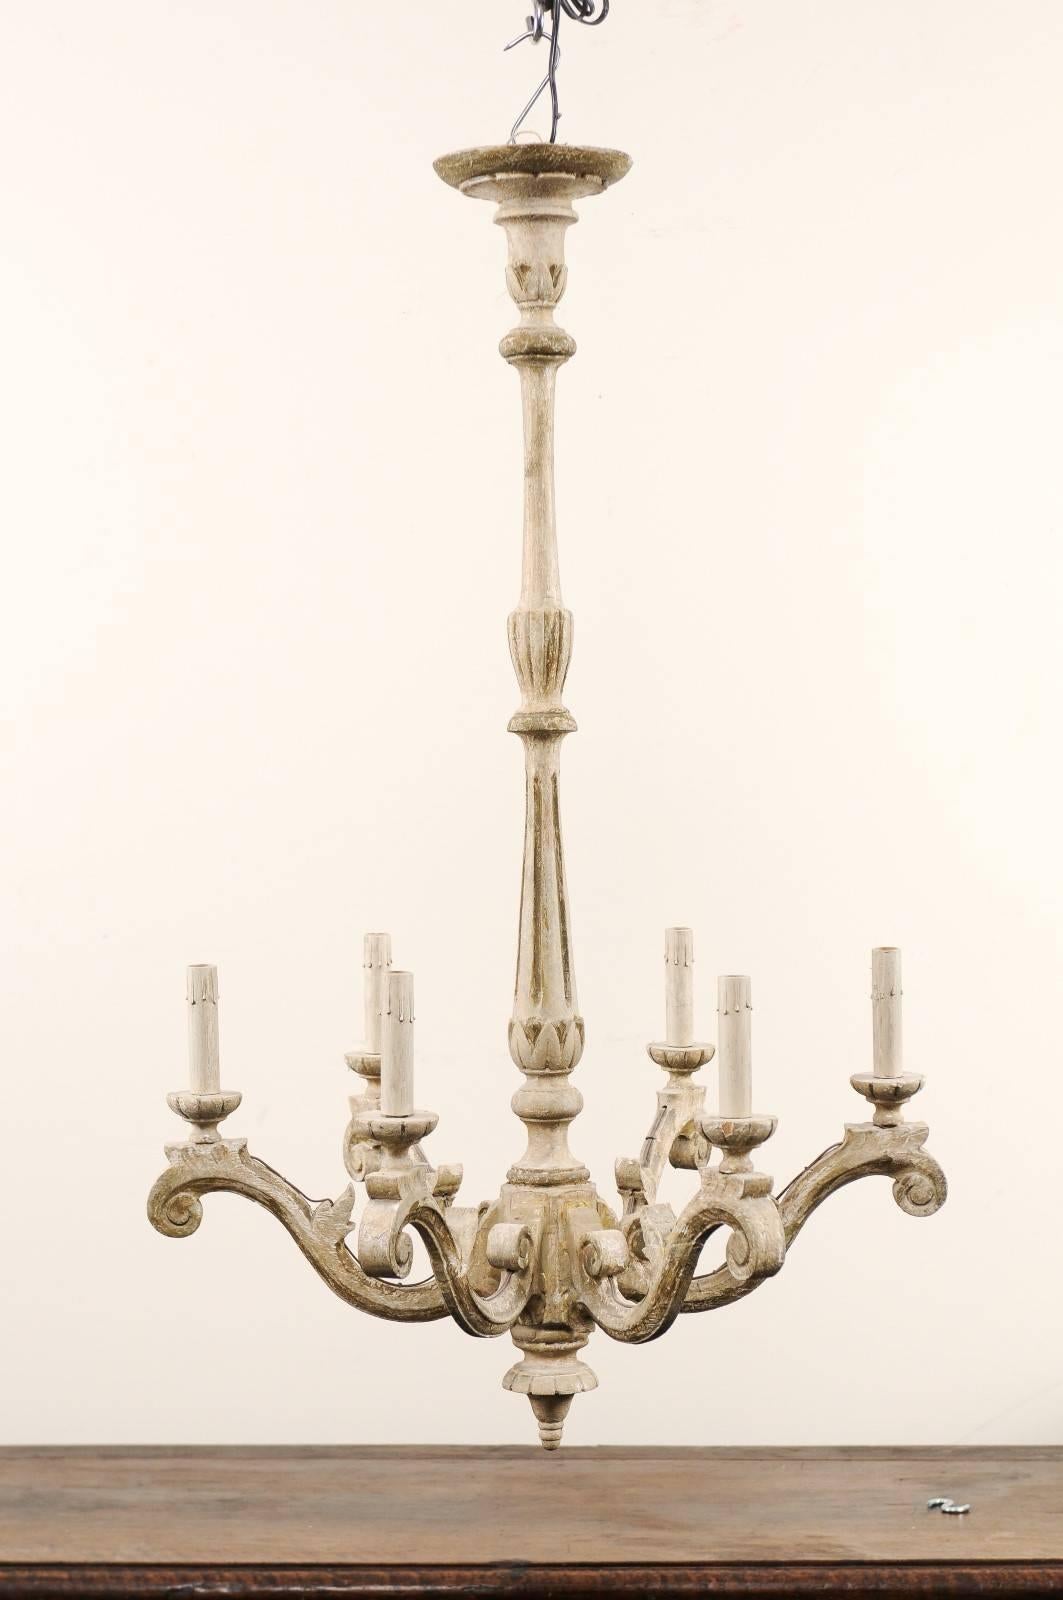 An elegant pair of French carved and painted wood six-light chandeliers from the mid-20th century. This pair of French chandeliers each feature long, slender carved central columns which lead down to six elegantly scrolled arms that lift up and